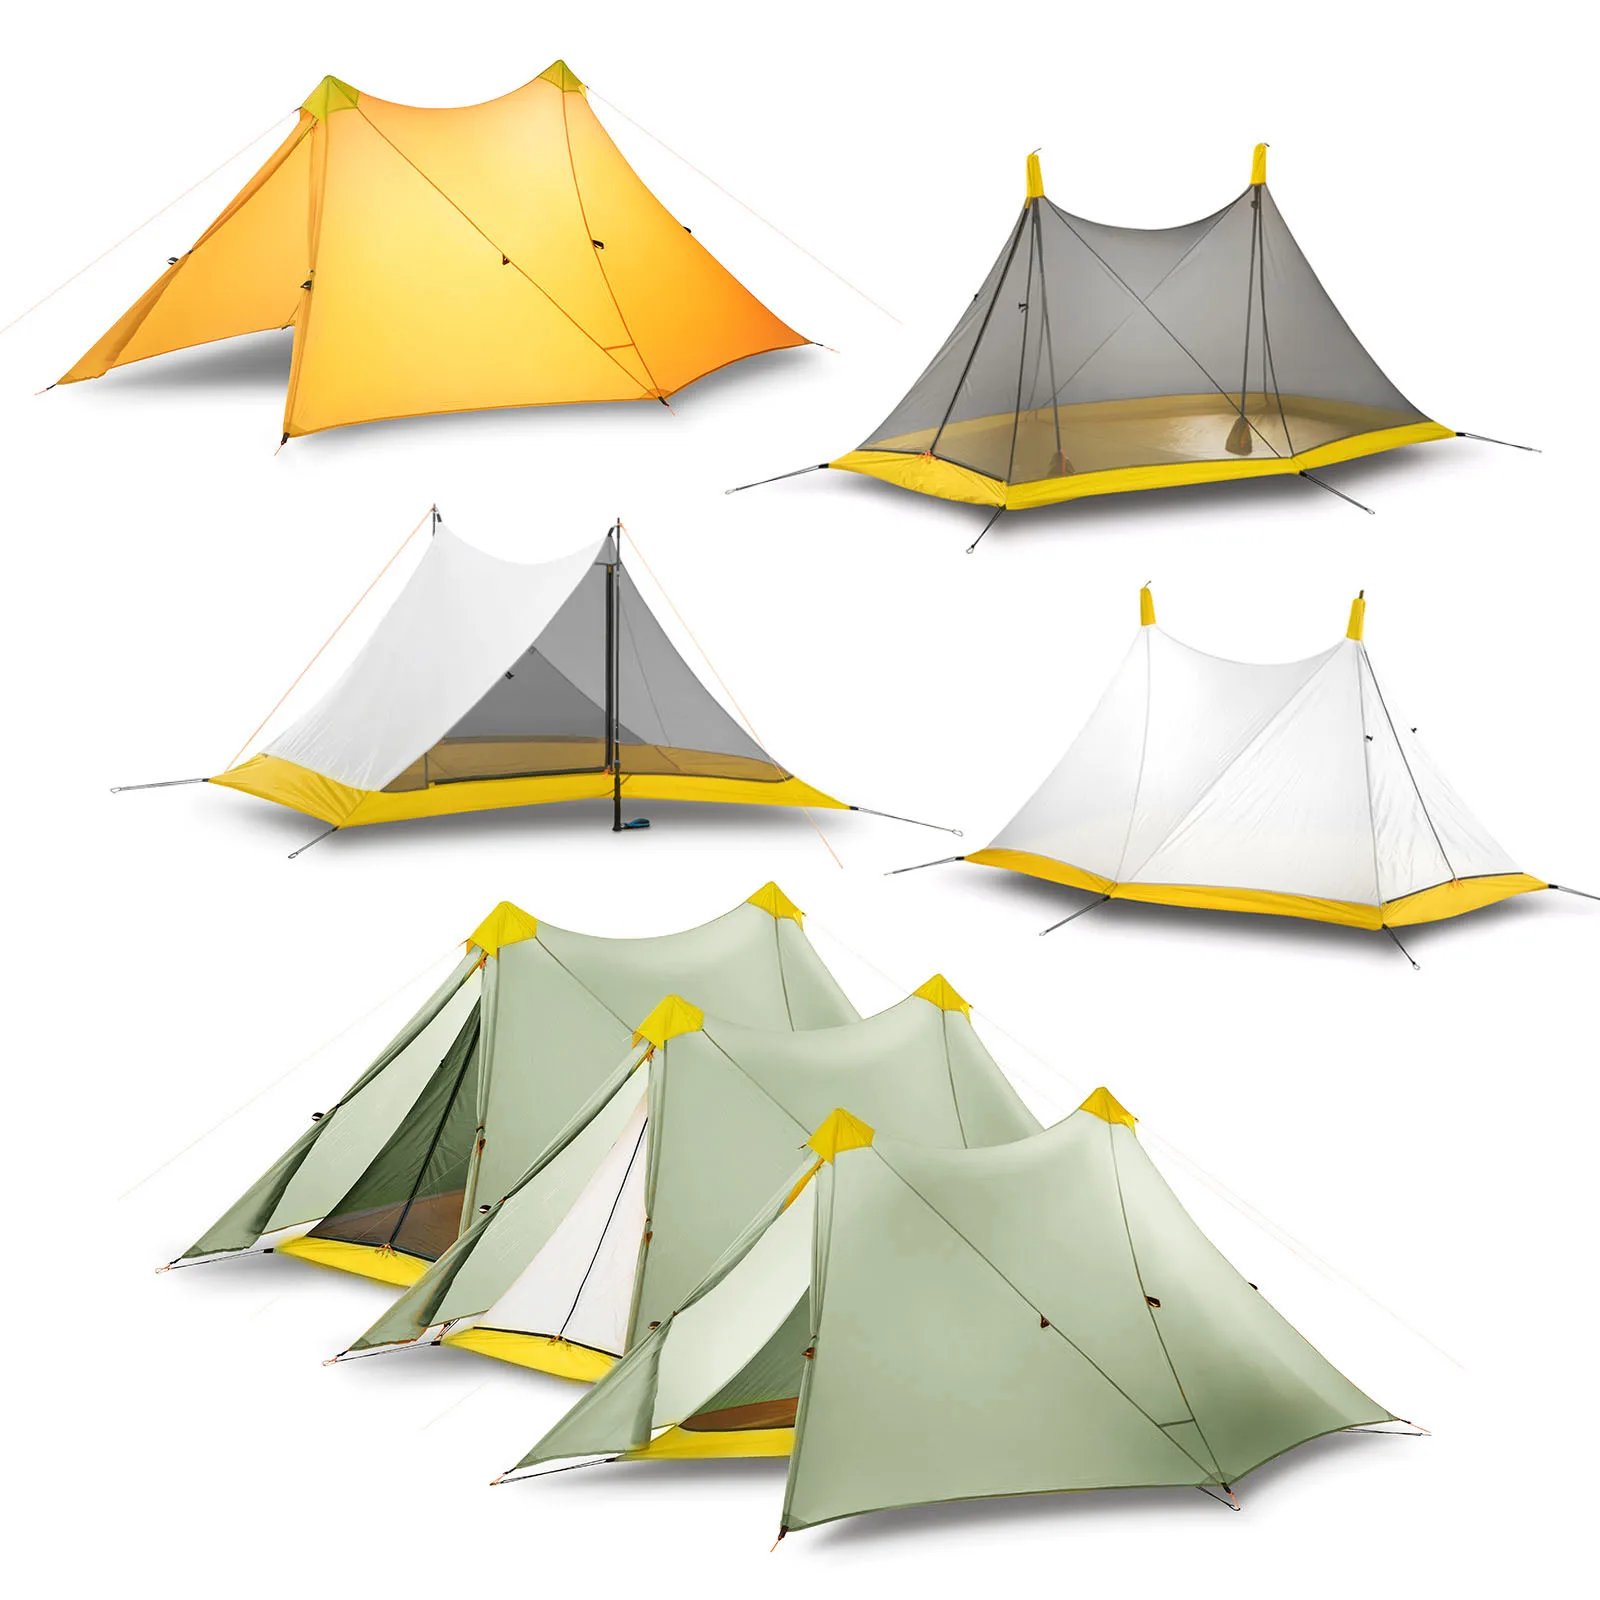 

Ultralight Outdoor Camping Tent /Inner Tent 1-2 Person 20D Nylon Both Sides Silicon Coating Rodless Double Tower Tent 3/4 Season